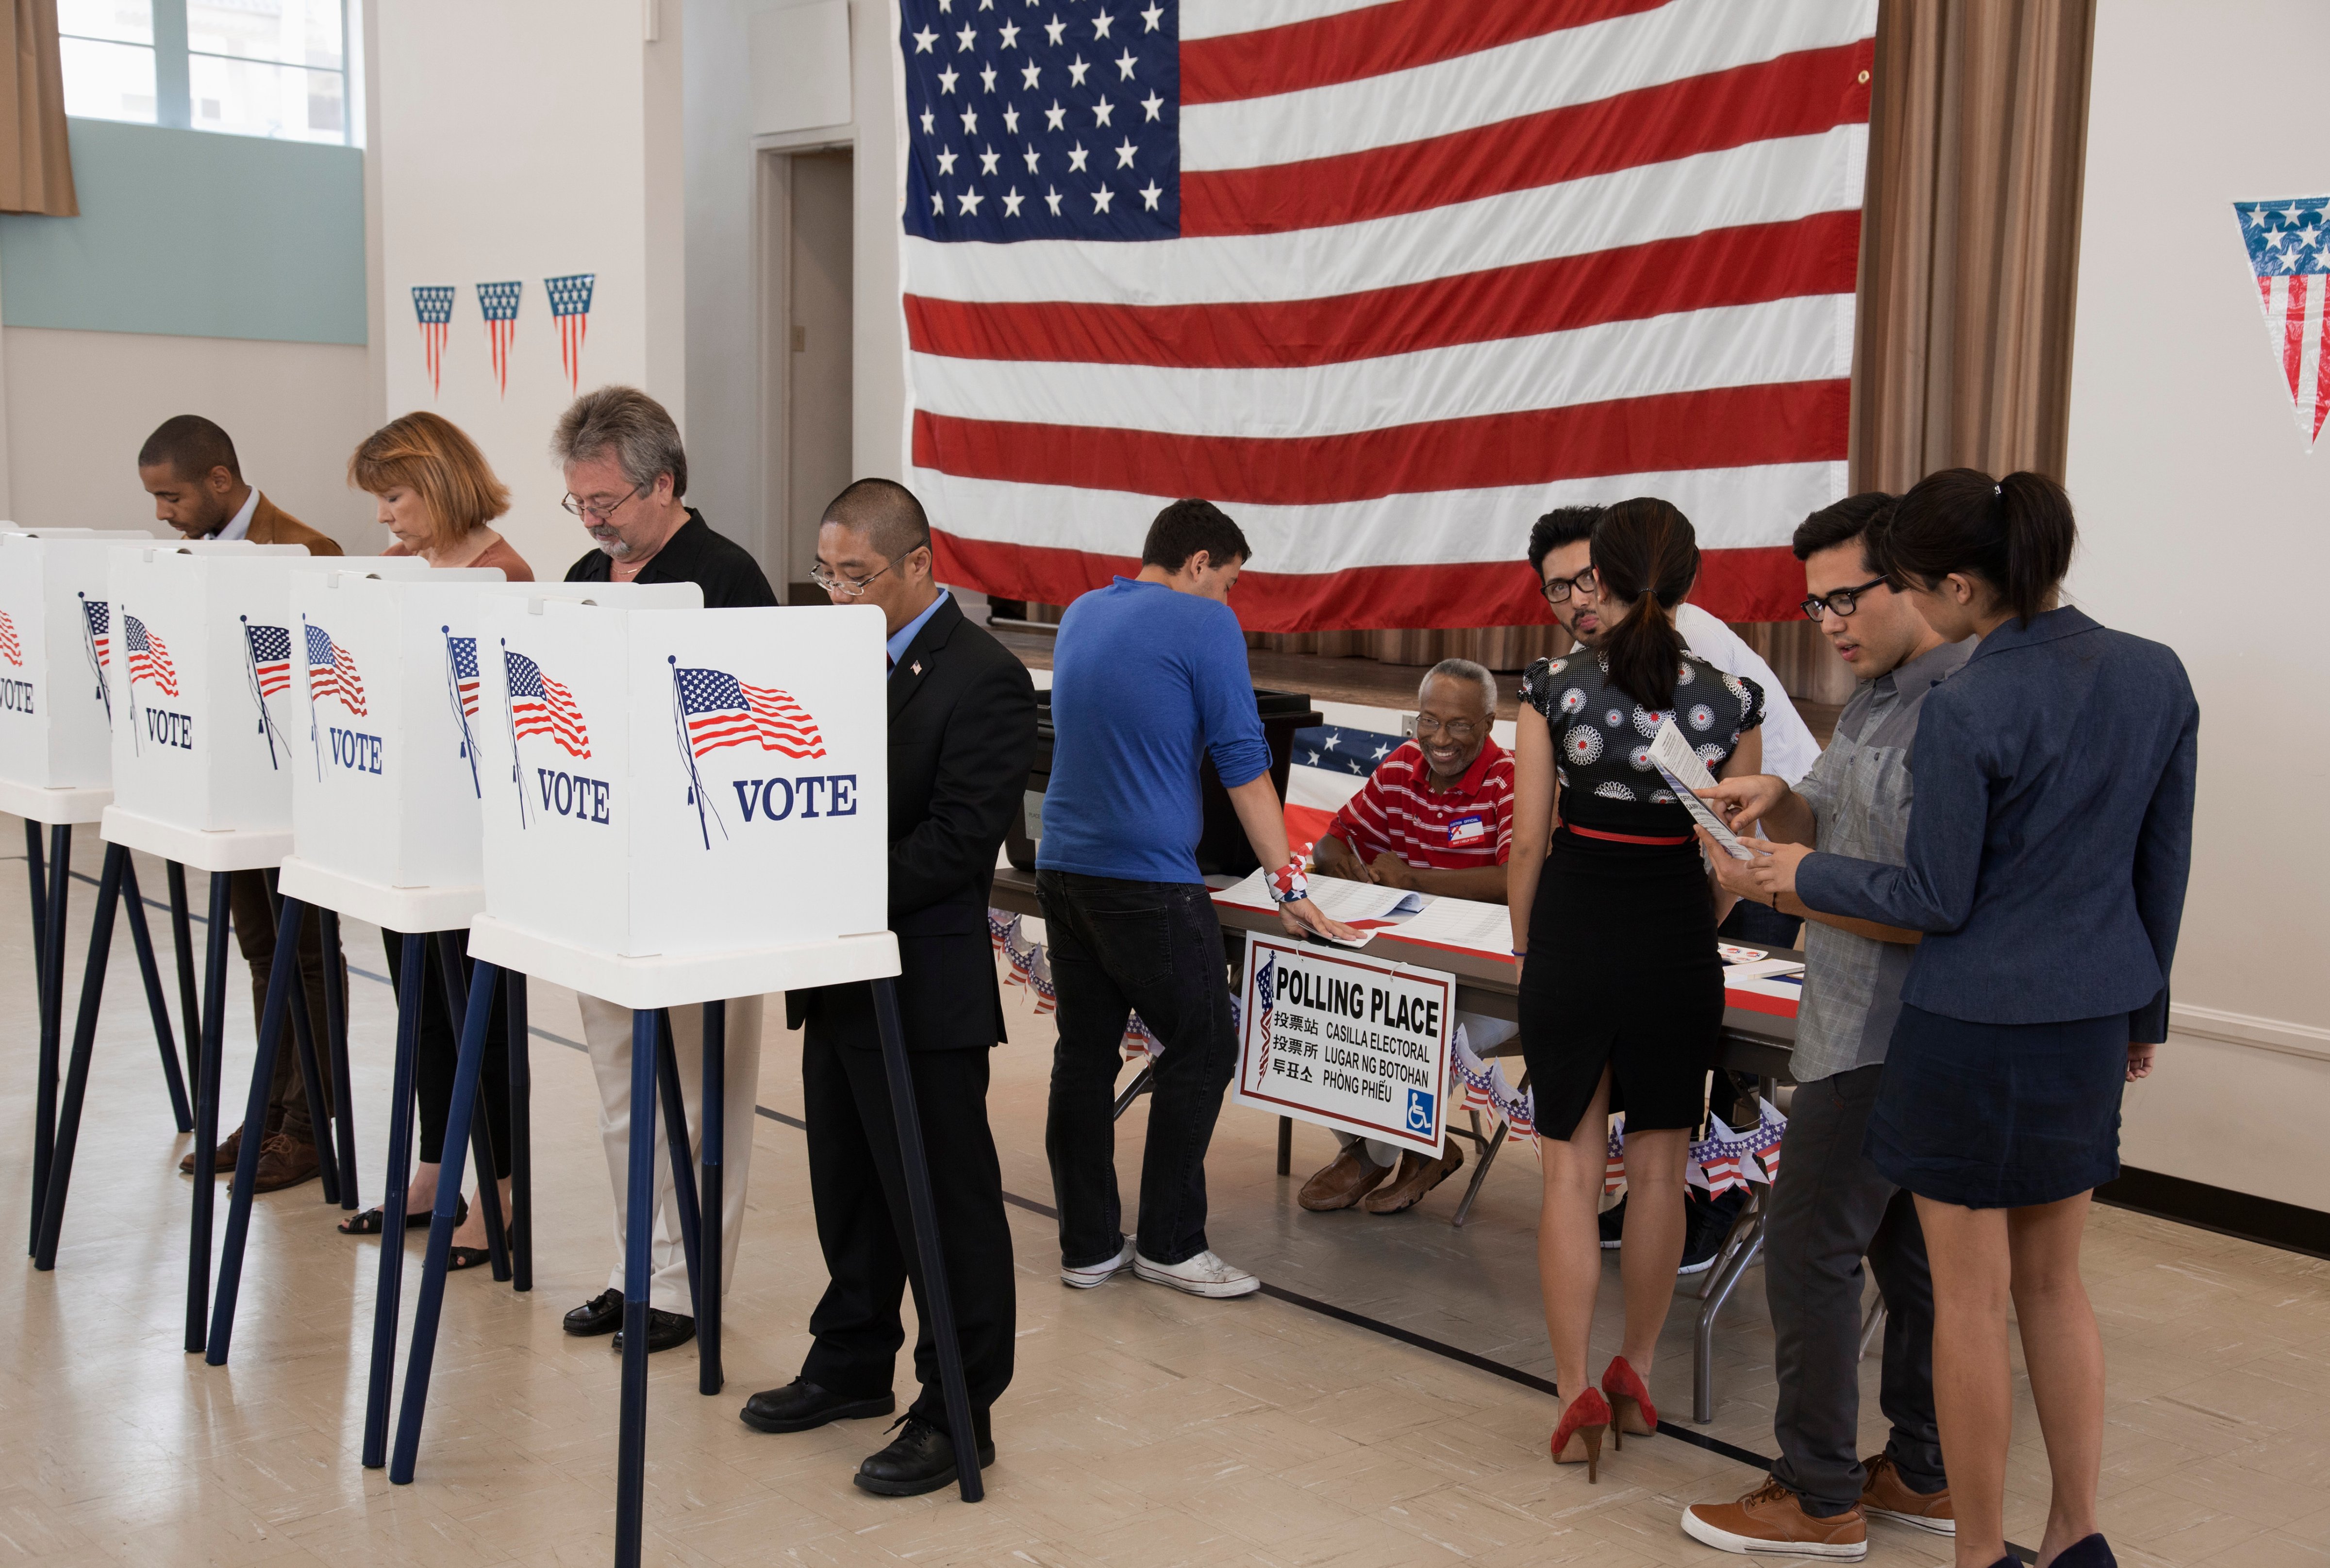 People voting in polling place